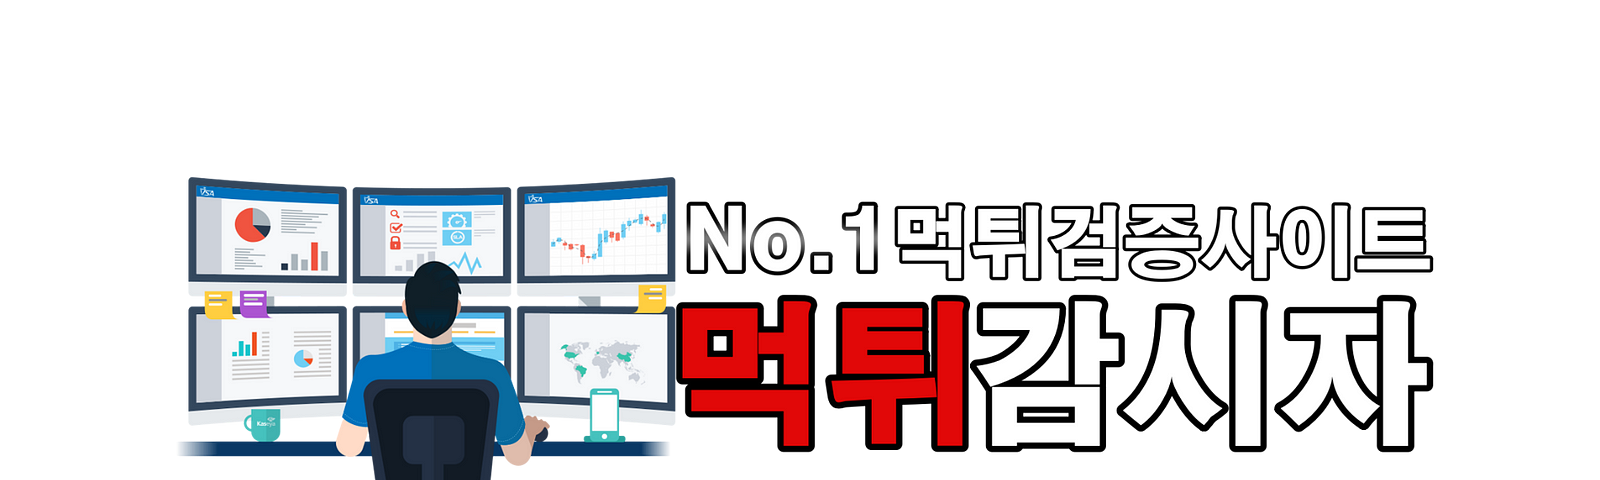 Archive of stories about 먹튀제보 - Medium